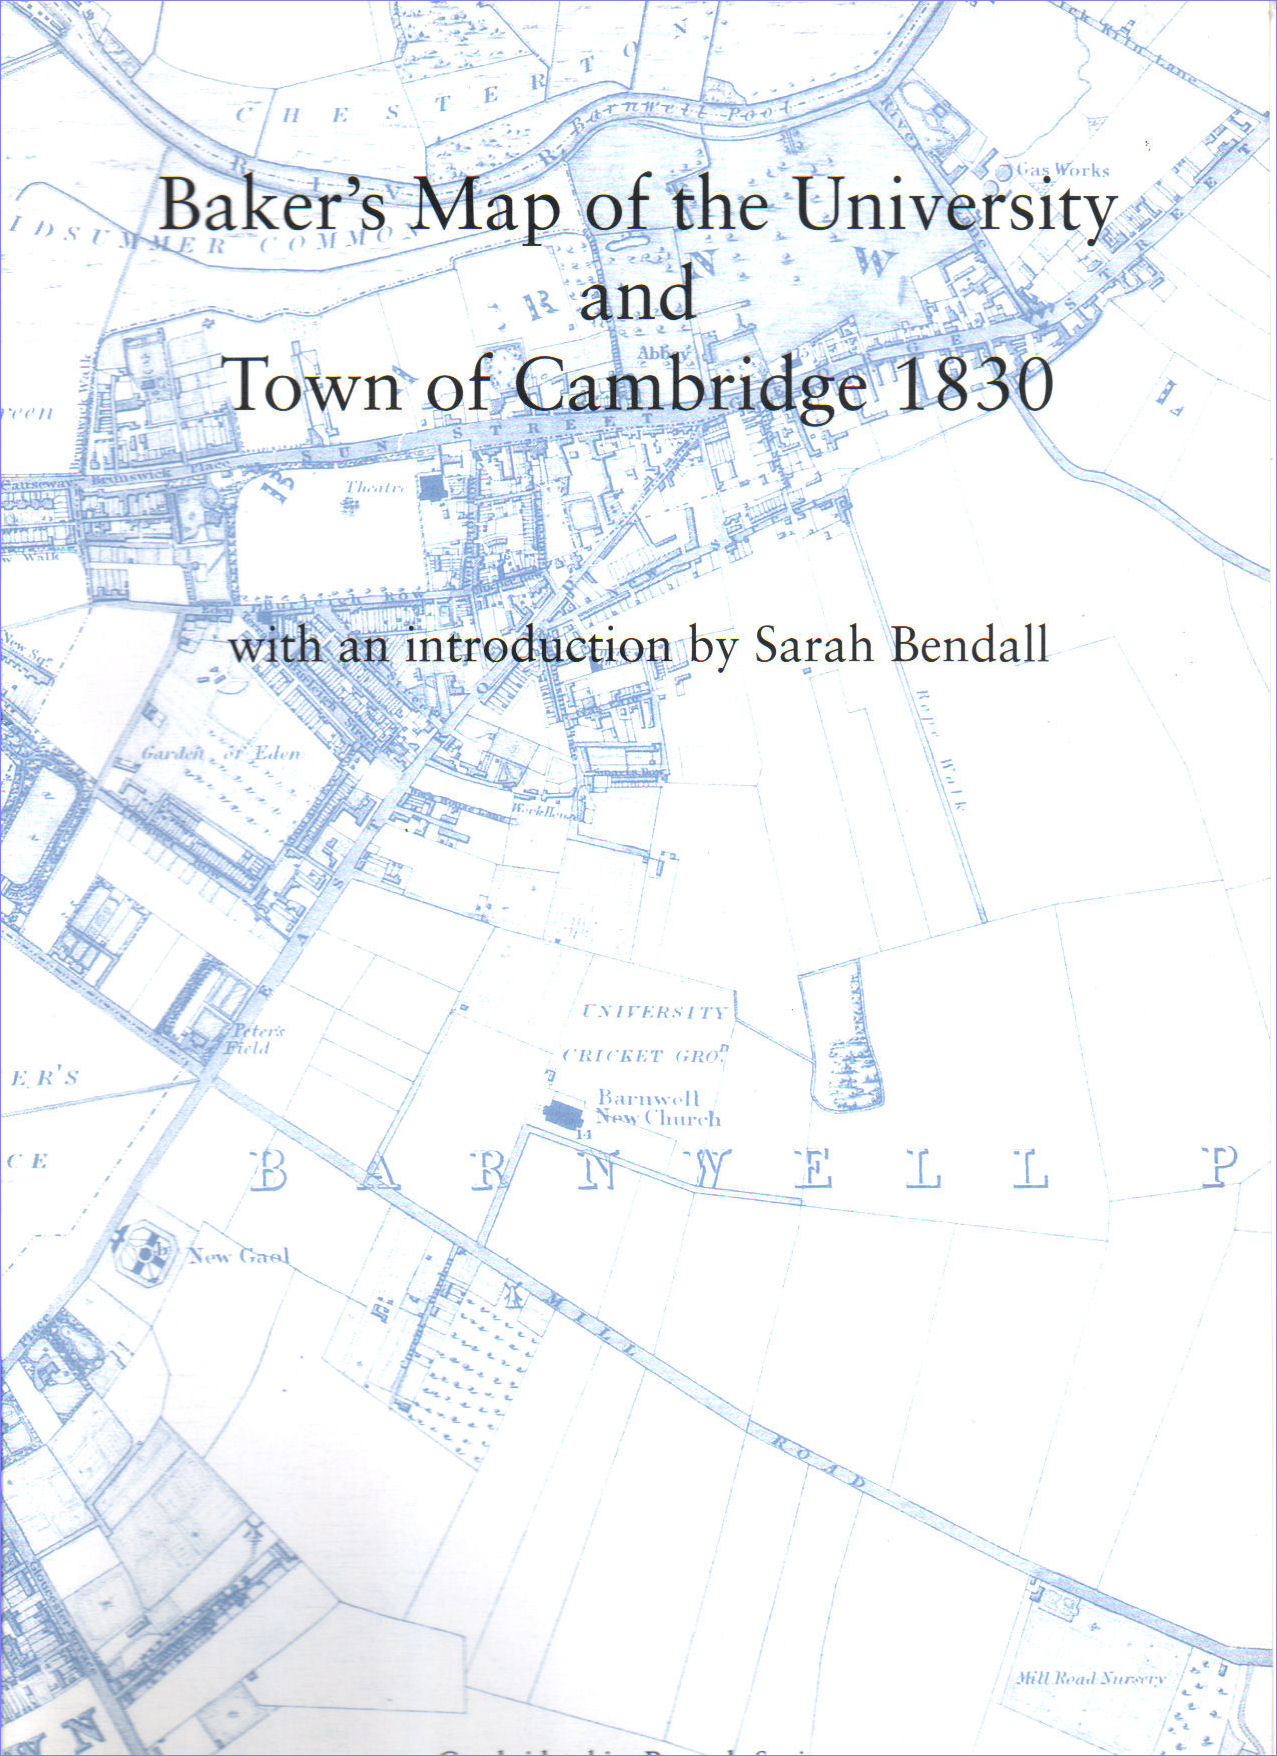 13. UNAVAILABLE. OUT OF PRINT and NO LONGER AVAILABLE FOR SALE. Baker's New Map of the Town and University of Cambridge, 1830.